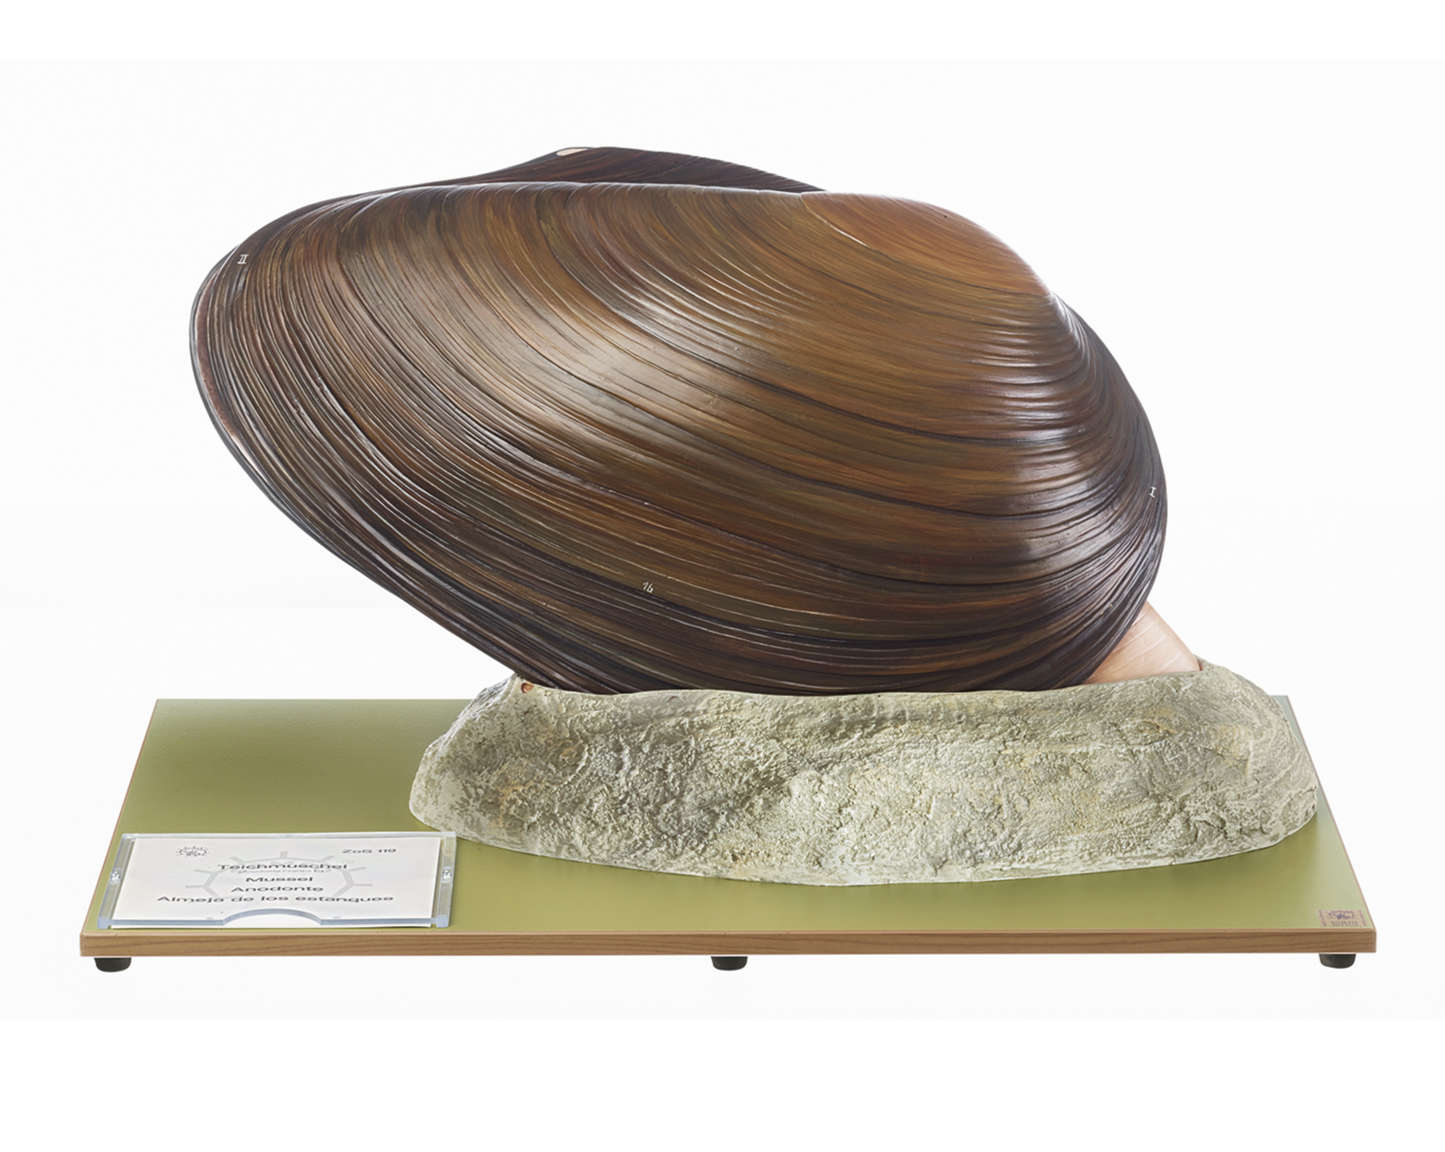 Model of a mussel (Anodonta cygnea) in the highest quality and enlarged. Can be separated into 5 parts